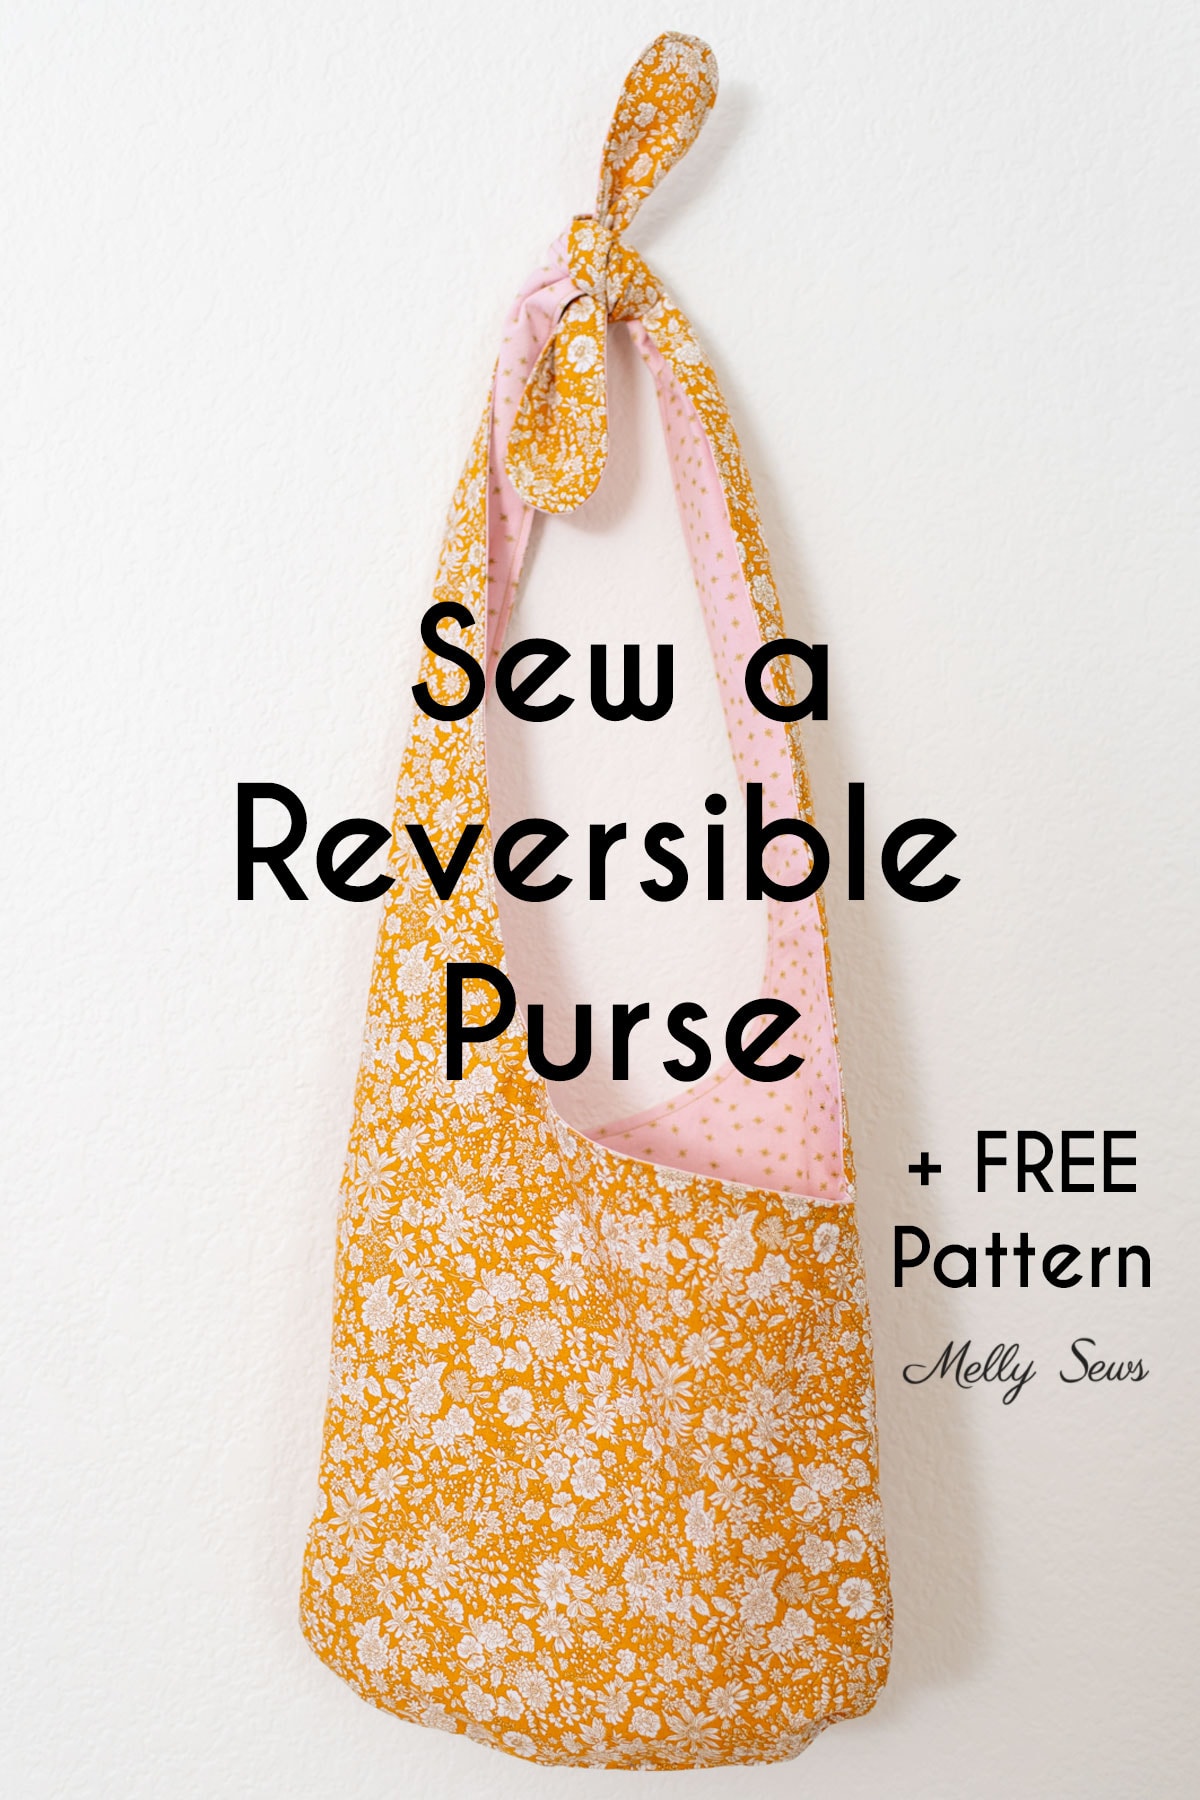 Free Reversible Crochet Purse Pattern with Pockets - Nicki's Homemade Crafts